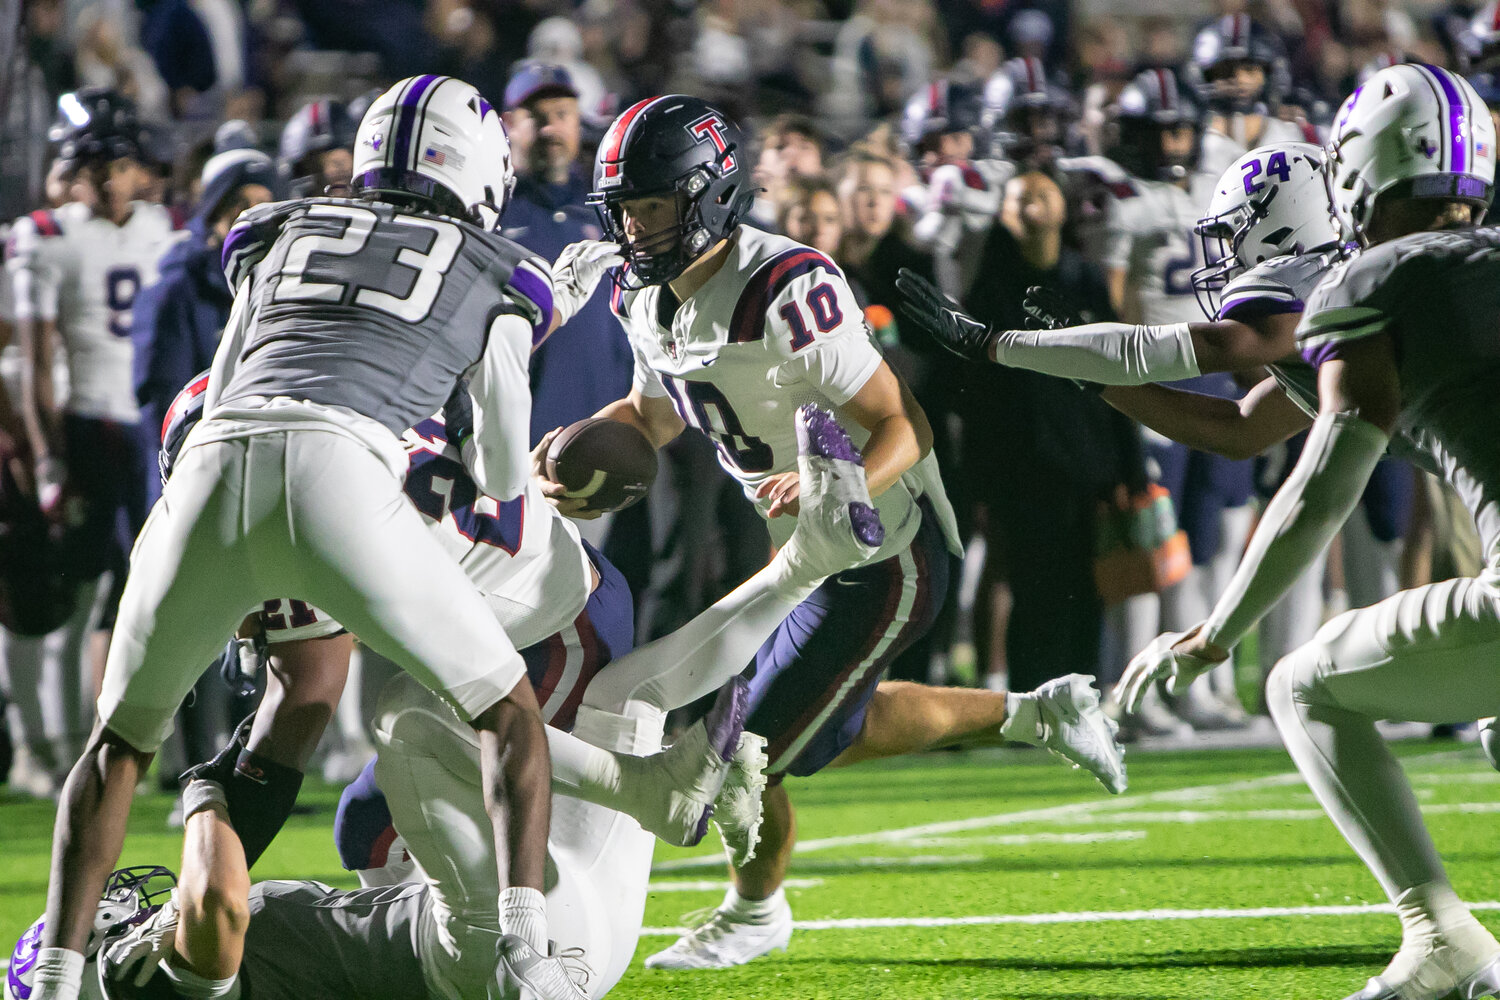 Wyatt Young tries to get past defenders during Friday's game between Tompkins and Ridge Point at Hall Stadium.